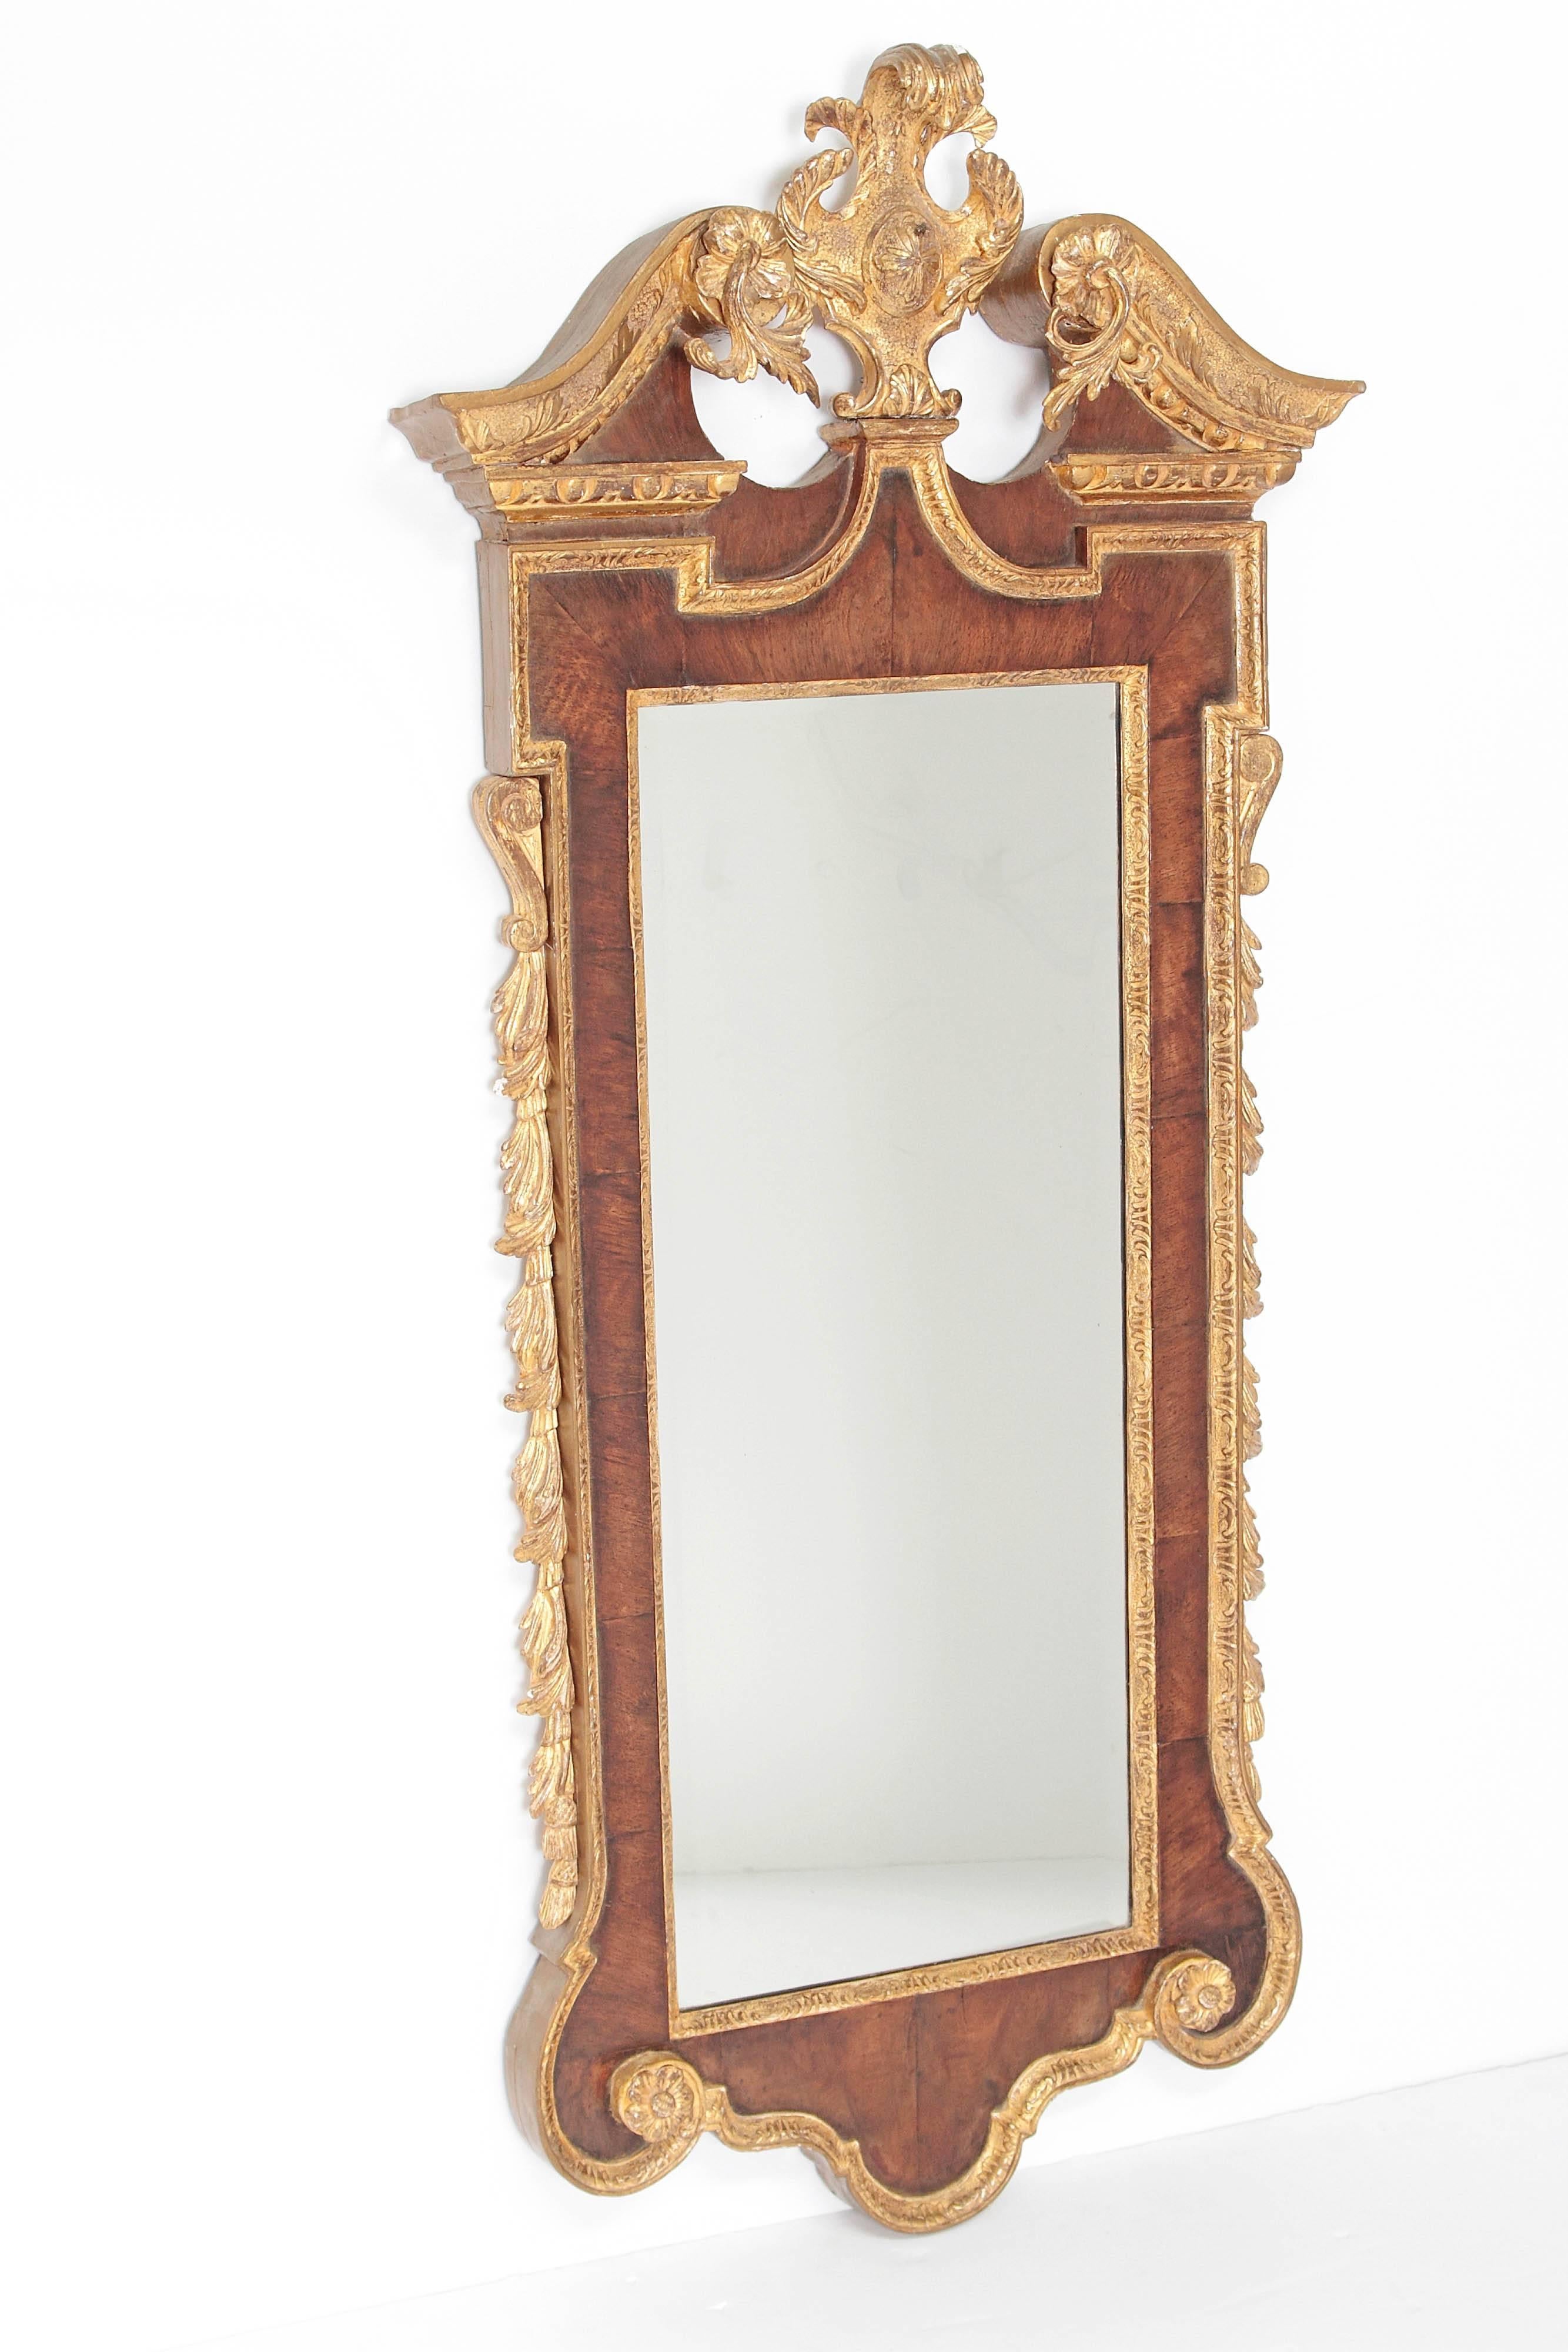 A George II mahogany pier mirror with elaborate gilt trim. Topped with a broken pediment with wreath and plum in center. The mirror is beveled, mid-18th century, England.